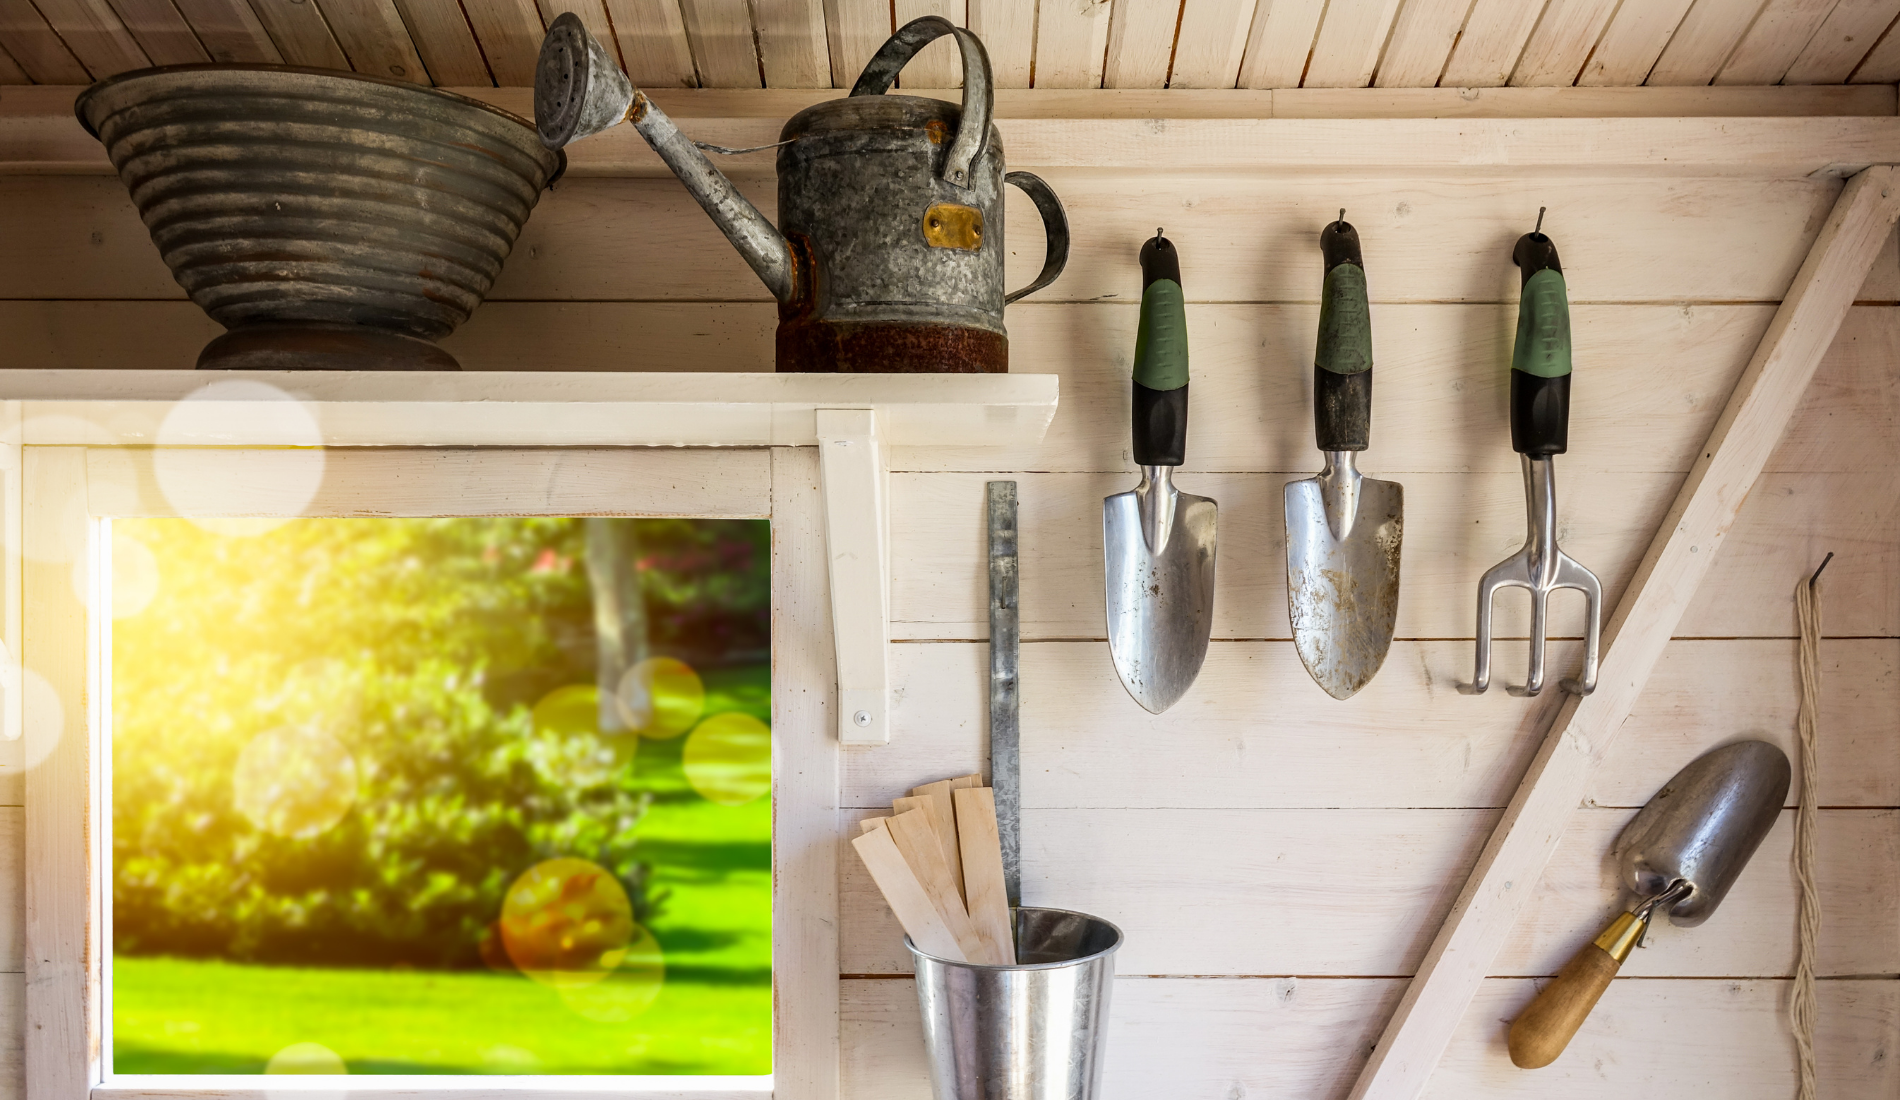 Gardening tools in a small garden storage shed.